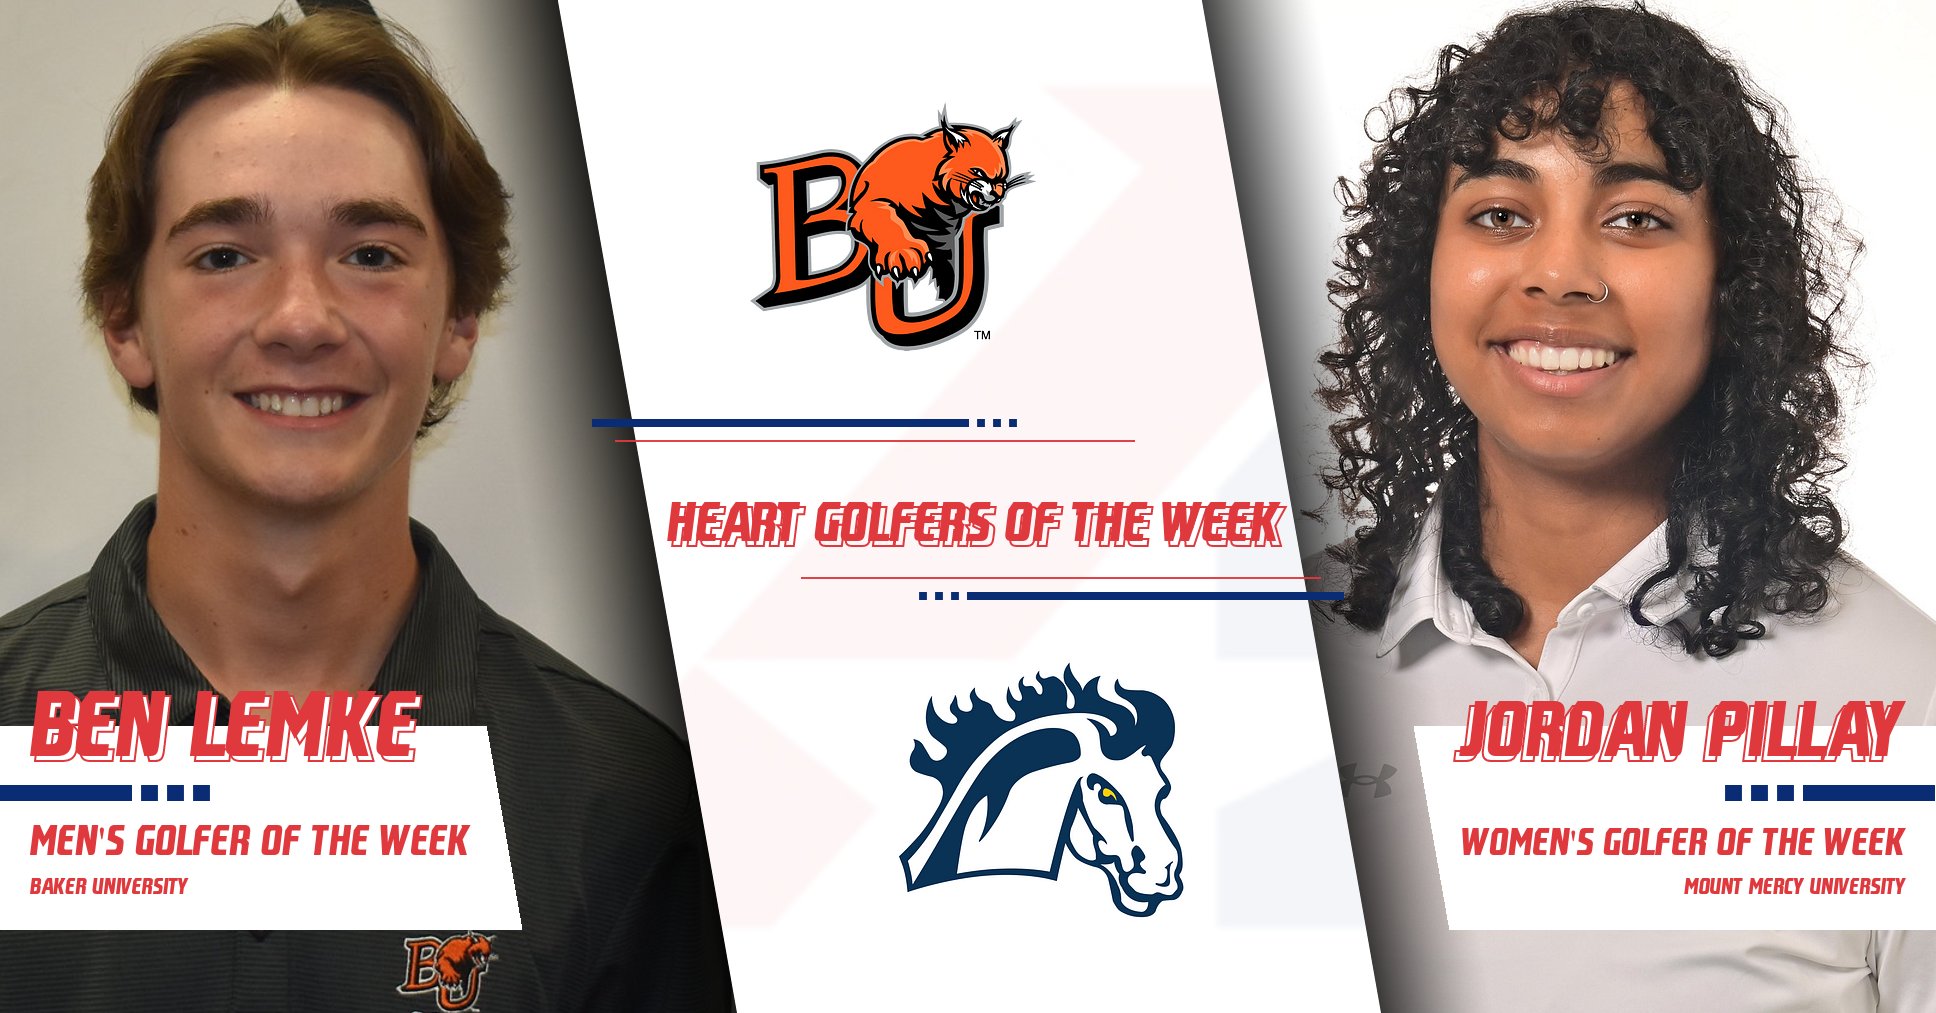 Heart Men’s and Women’s Golfer Awards of the Week Announced